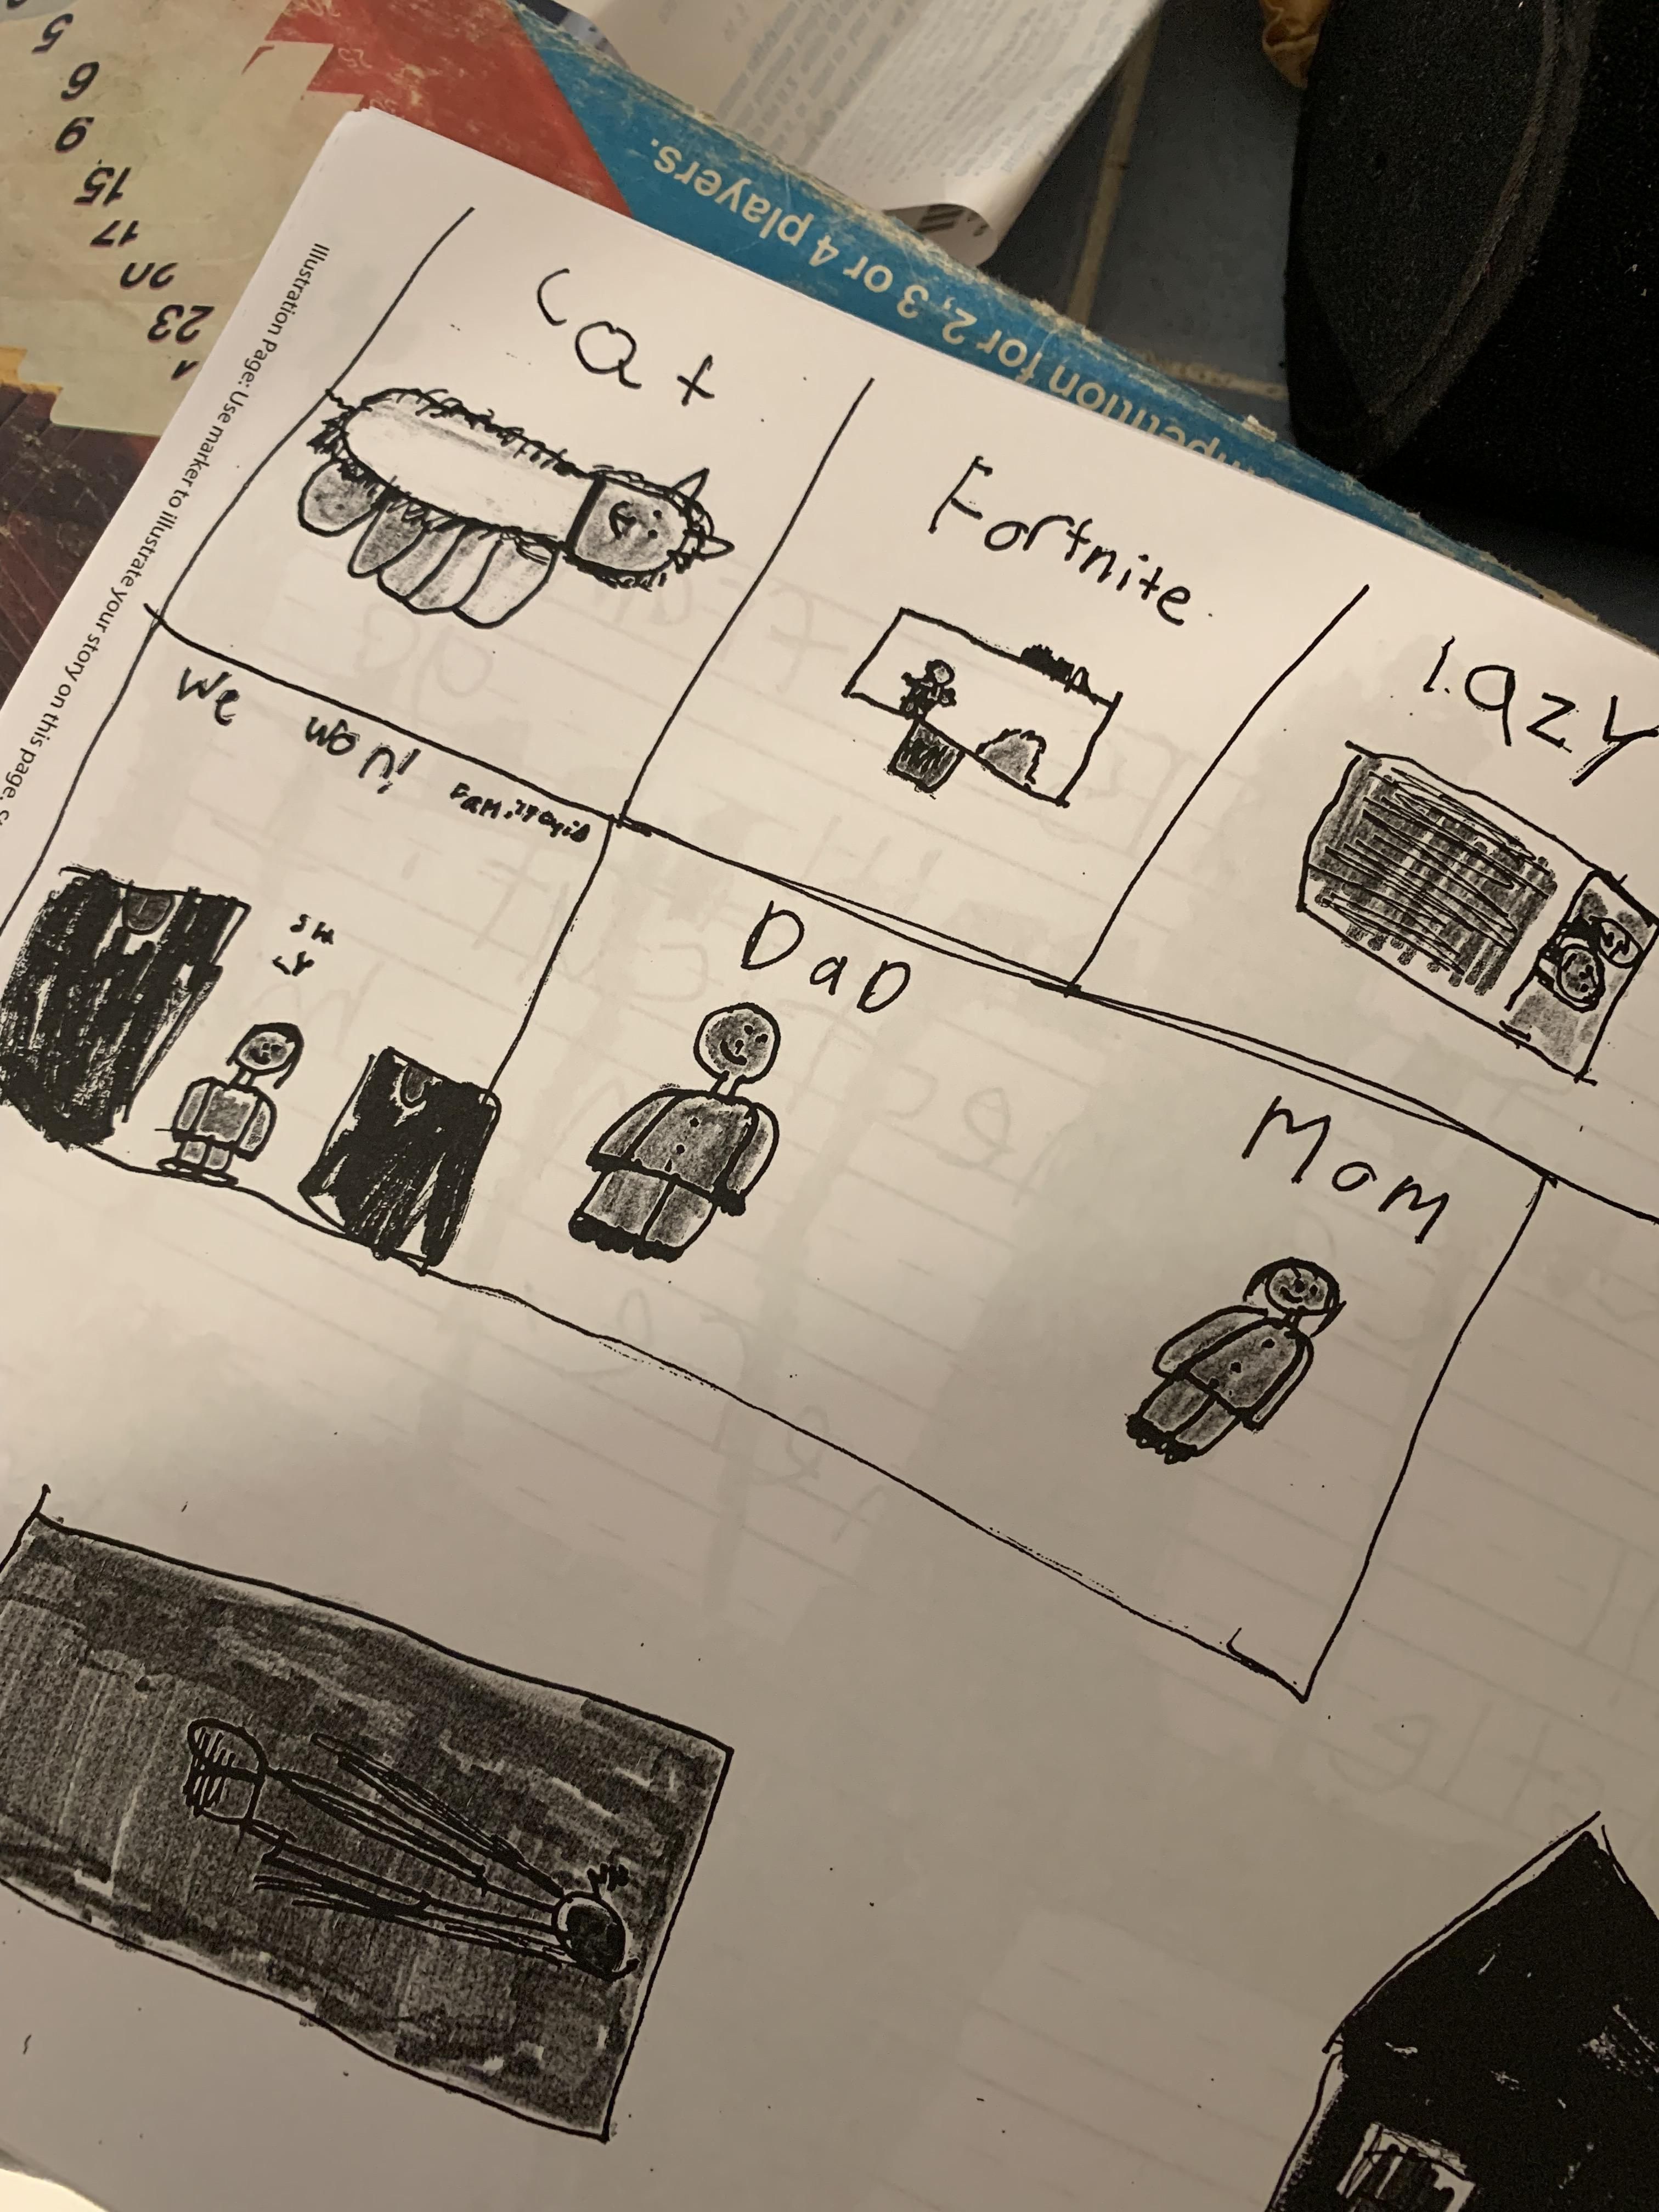 My 8 year old daughter’s 20-year plan. Own one cat, play Fortnite, be lazy, win Family Feud and live with her parents. ...***.